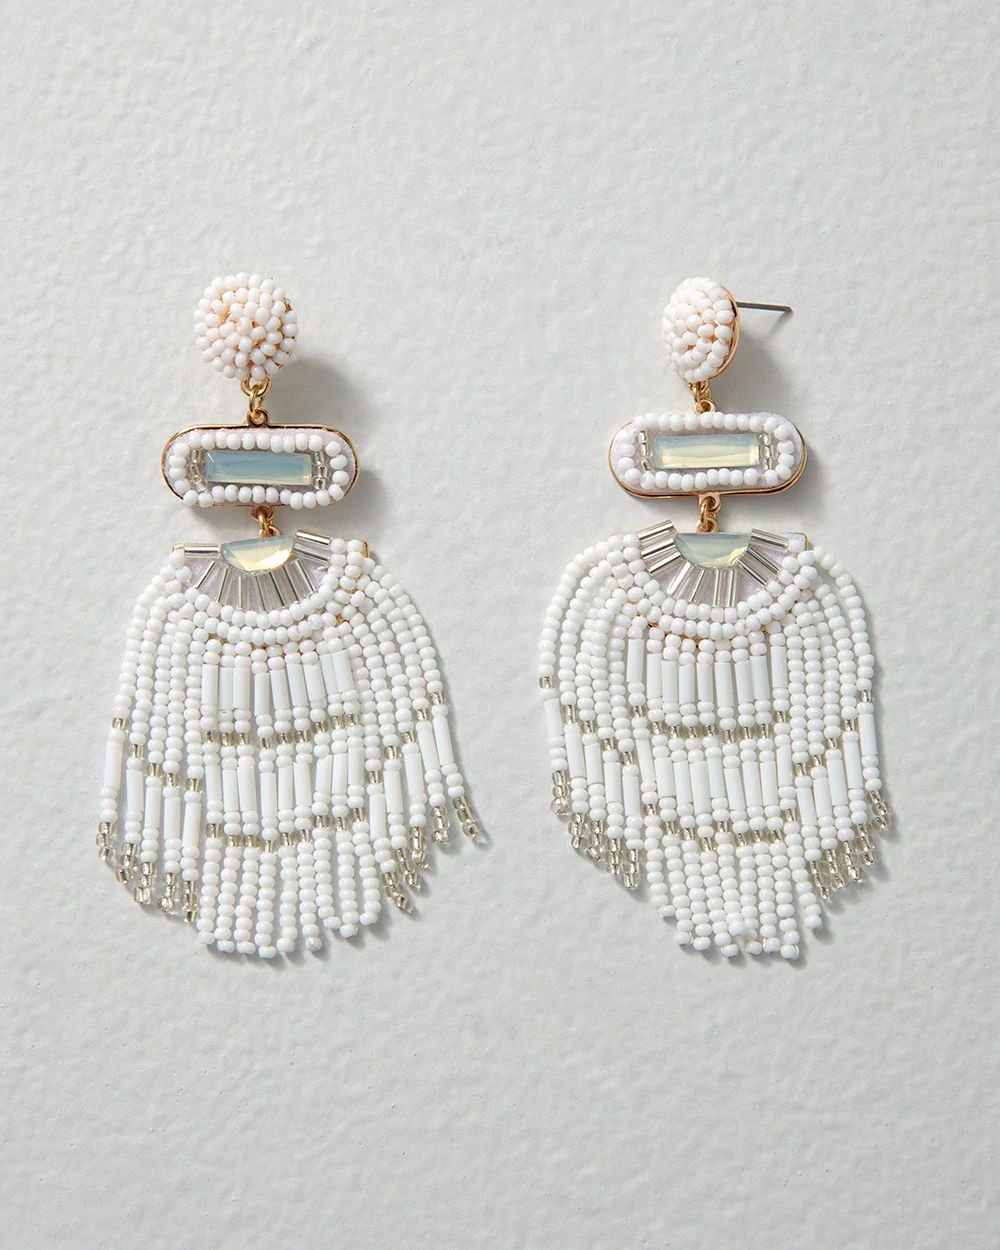 White Seed Bead Statement Earrings click to view larger image.